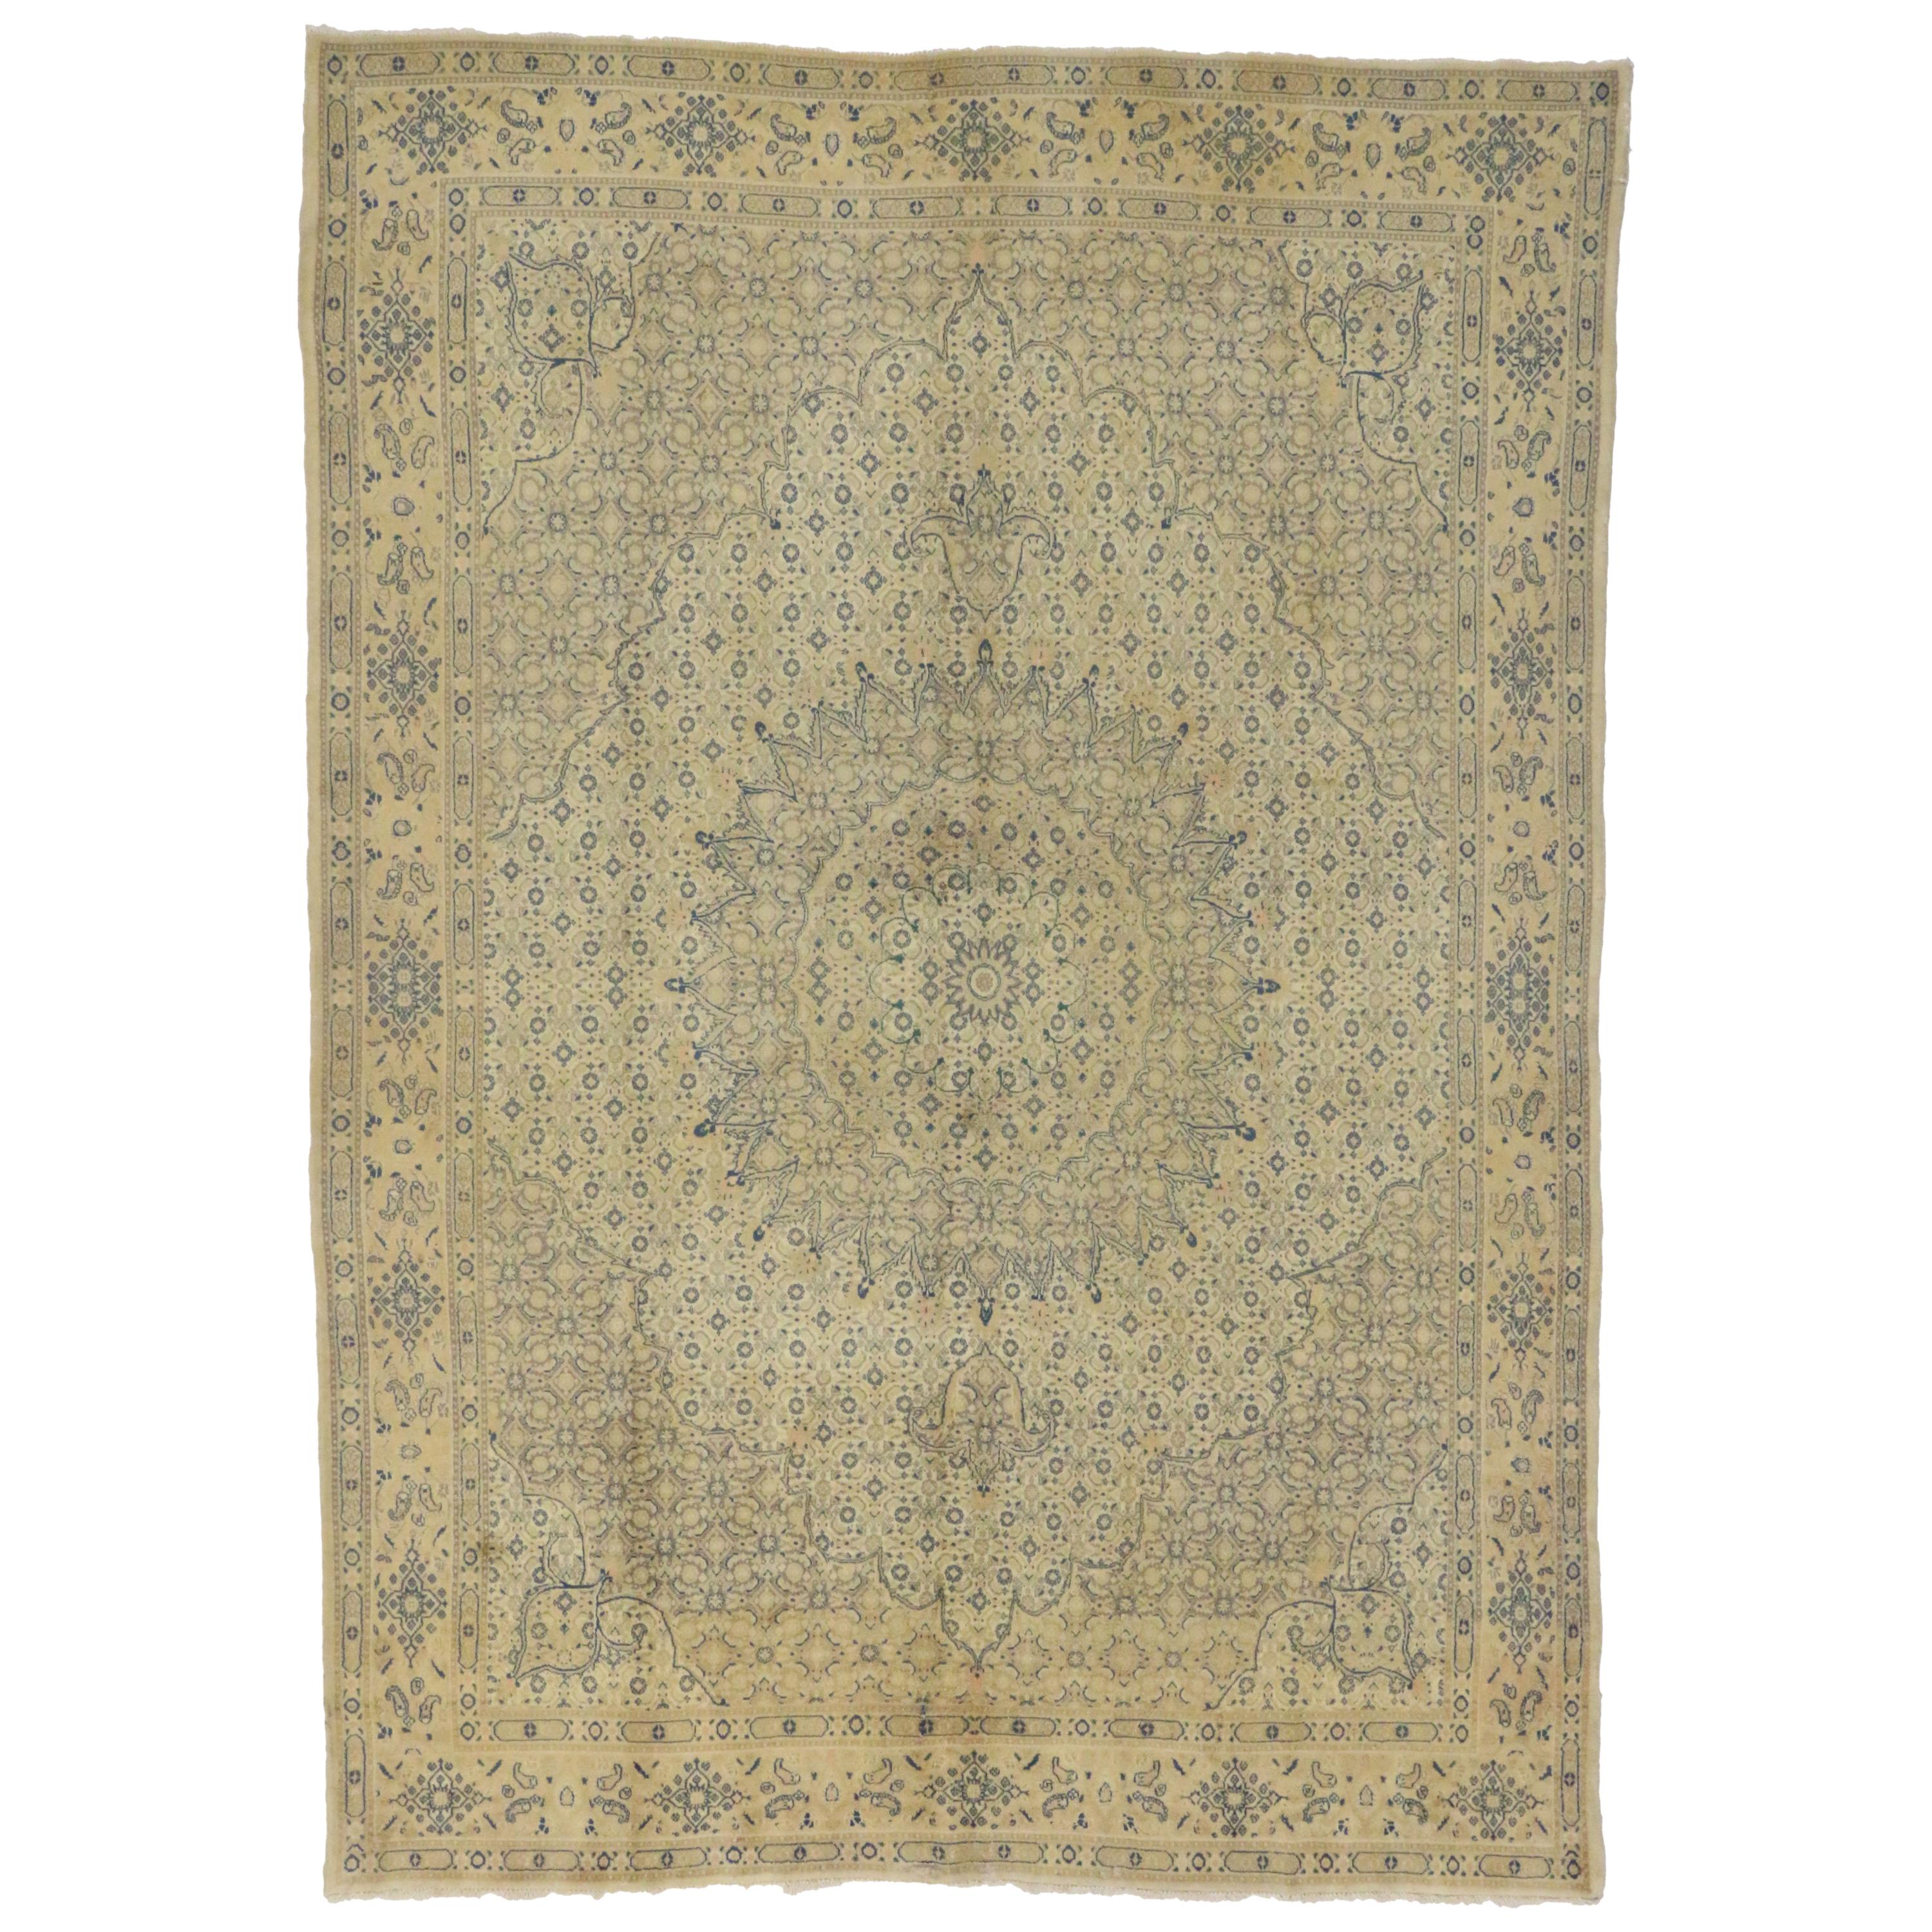 Vintage Persian Khorassan Area Rug with French Country Style